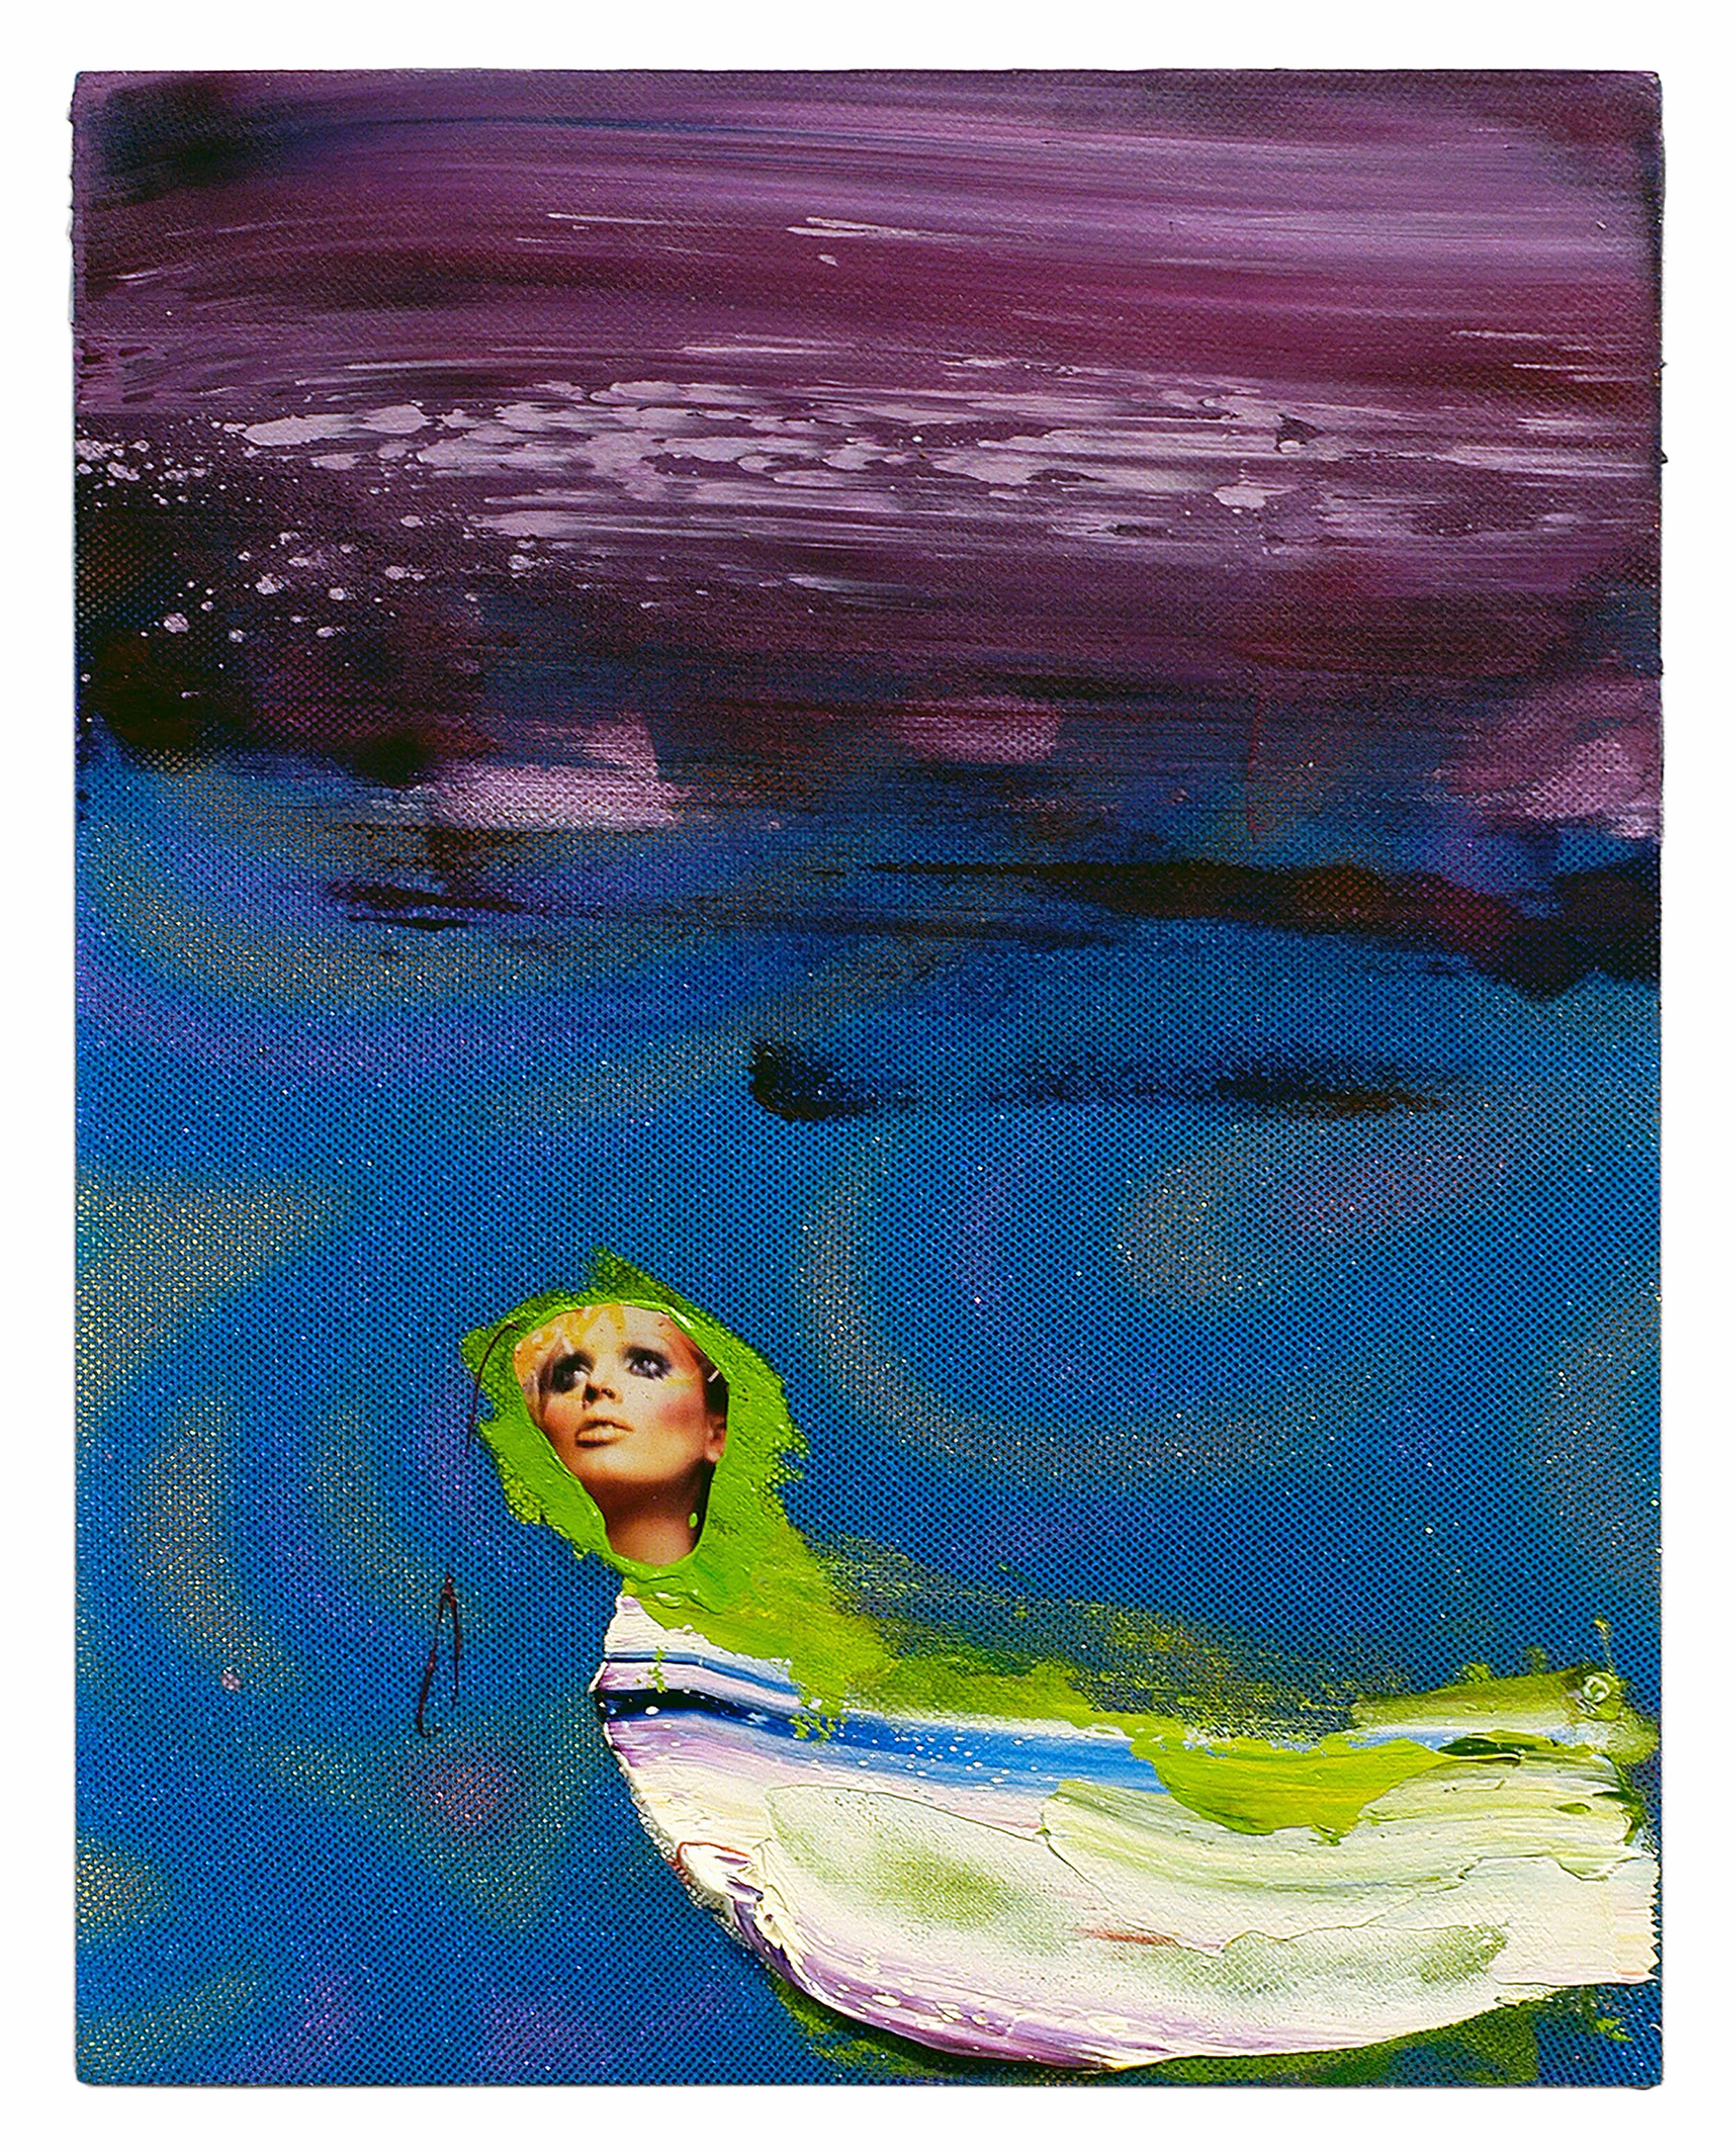  Drew Beattie  Mermaid   2005 acrylic and collage on canvas 14 x 11 inches 